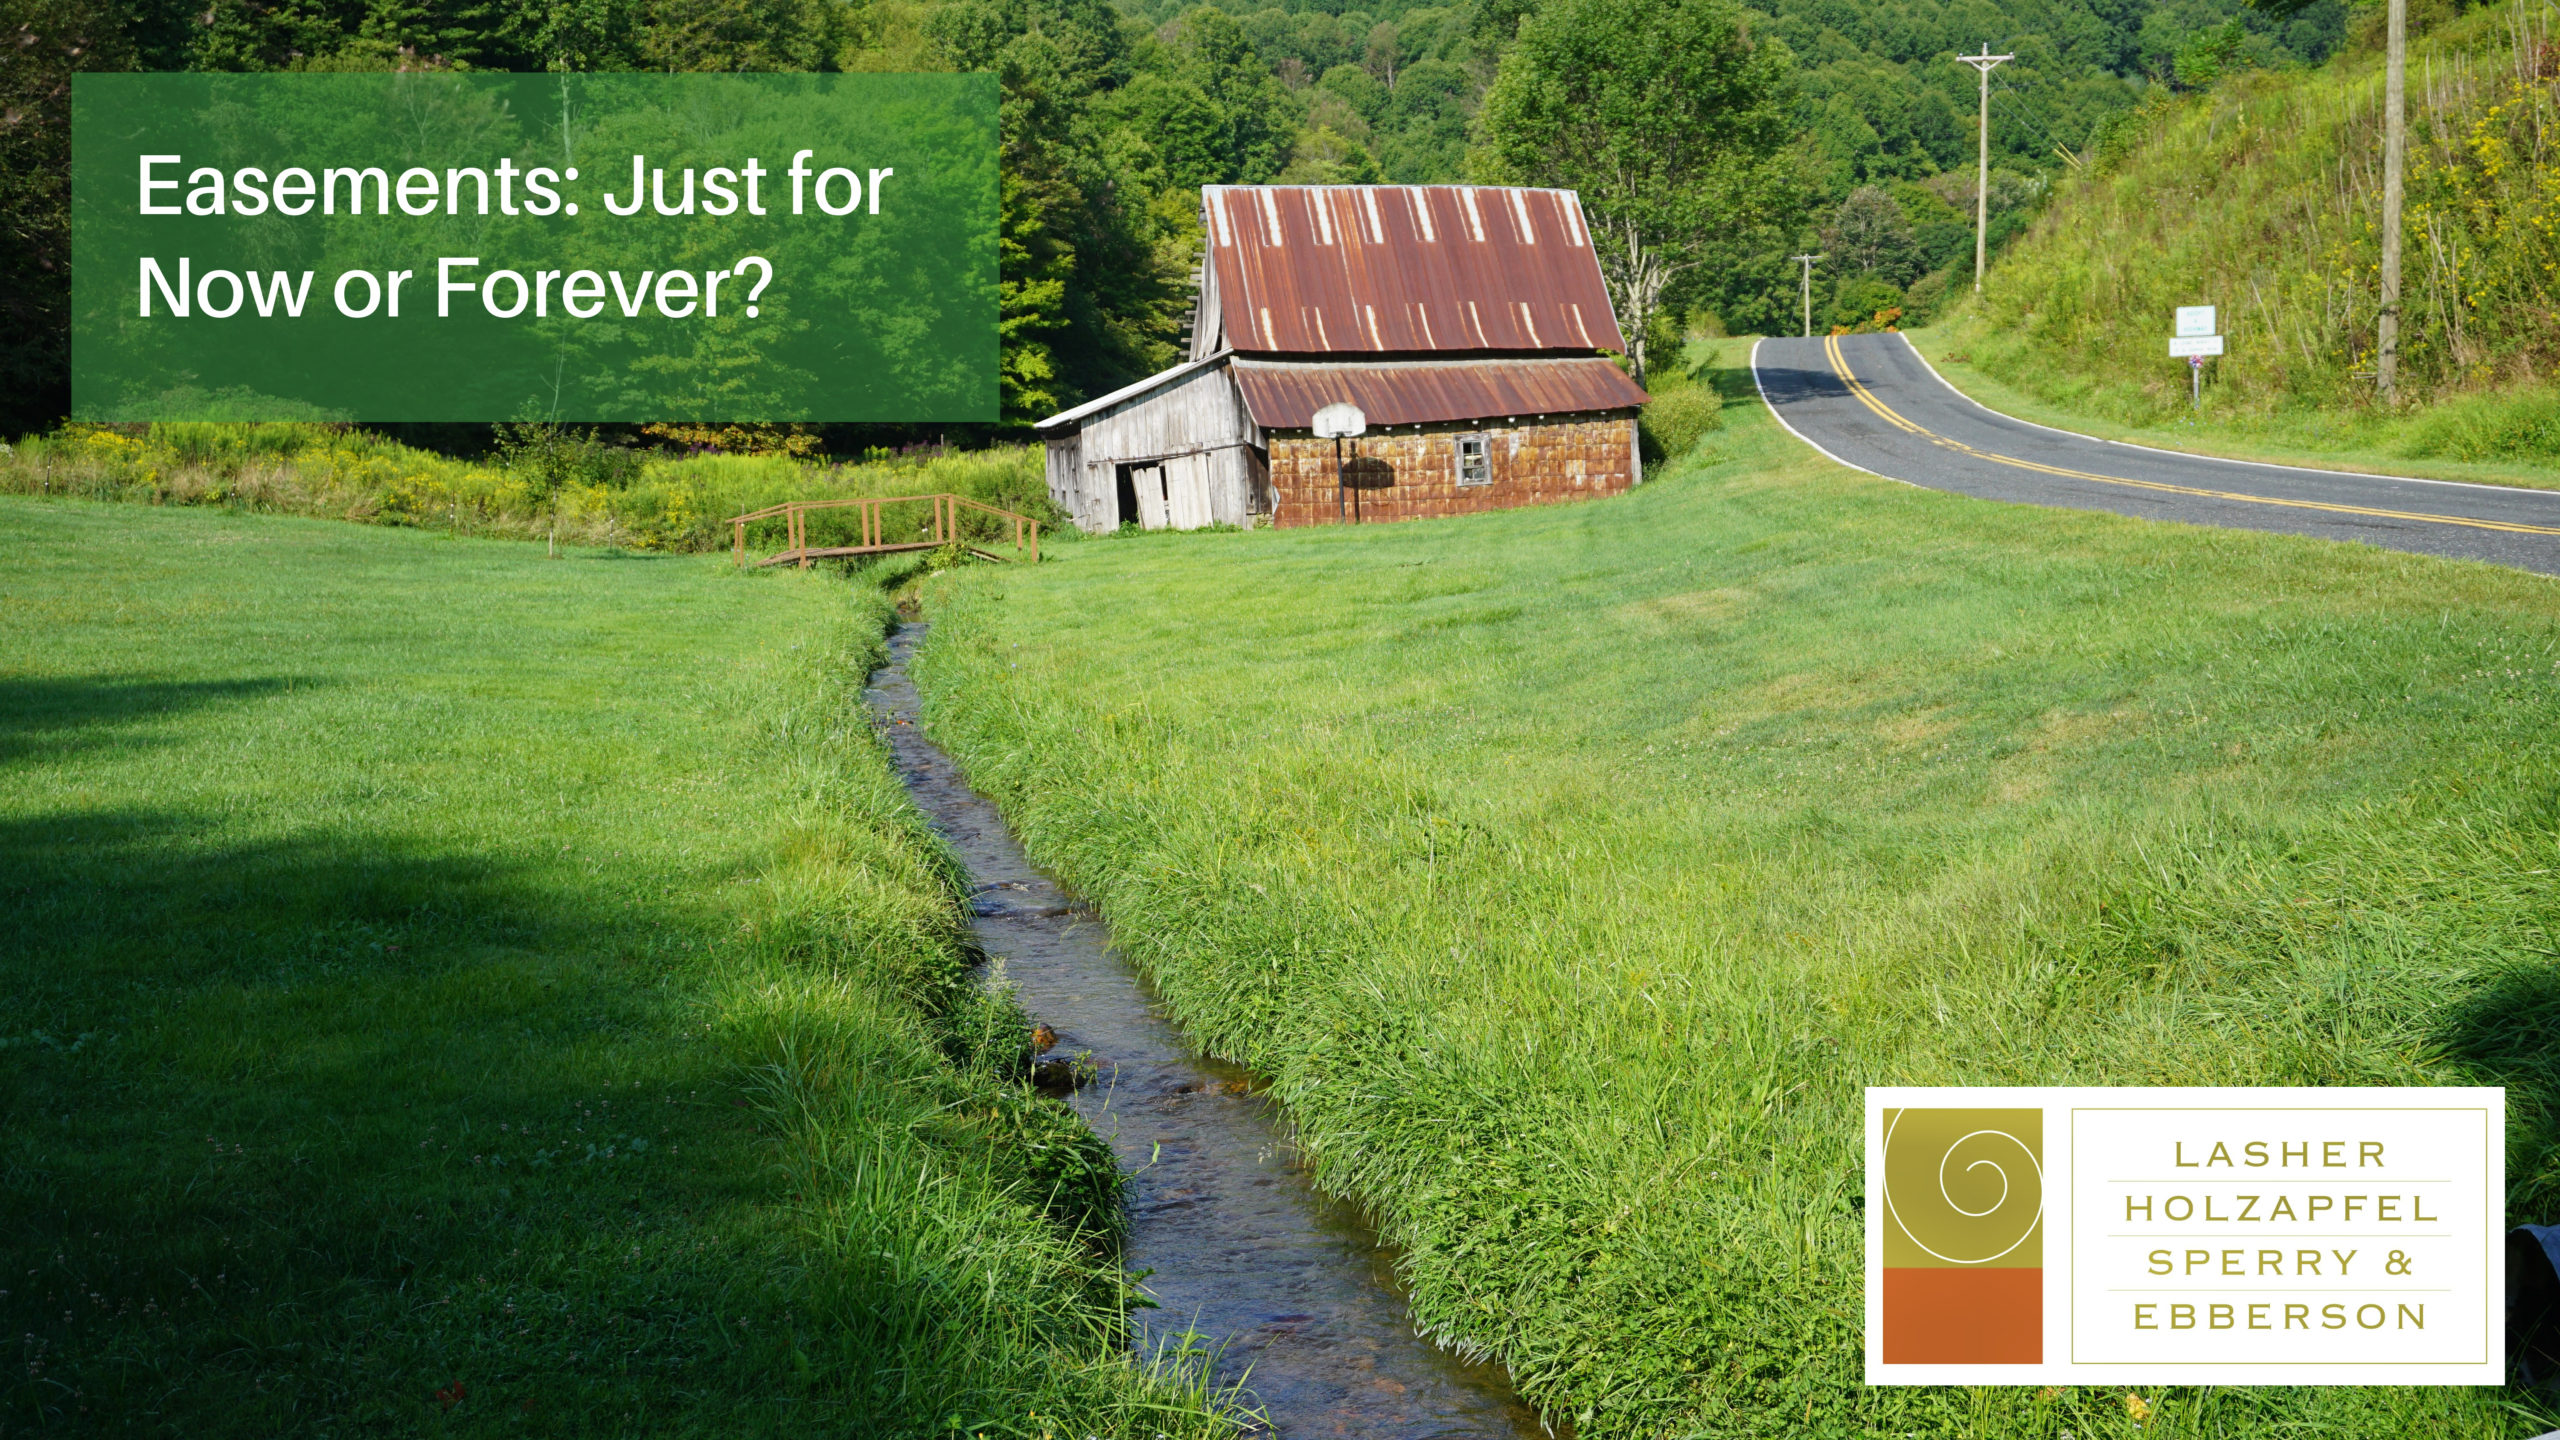 Easements: Just for Now or Forever?